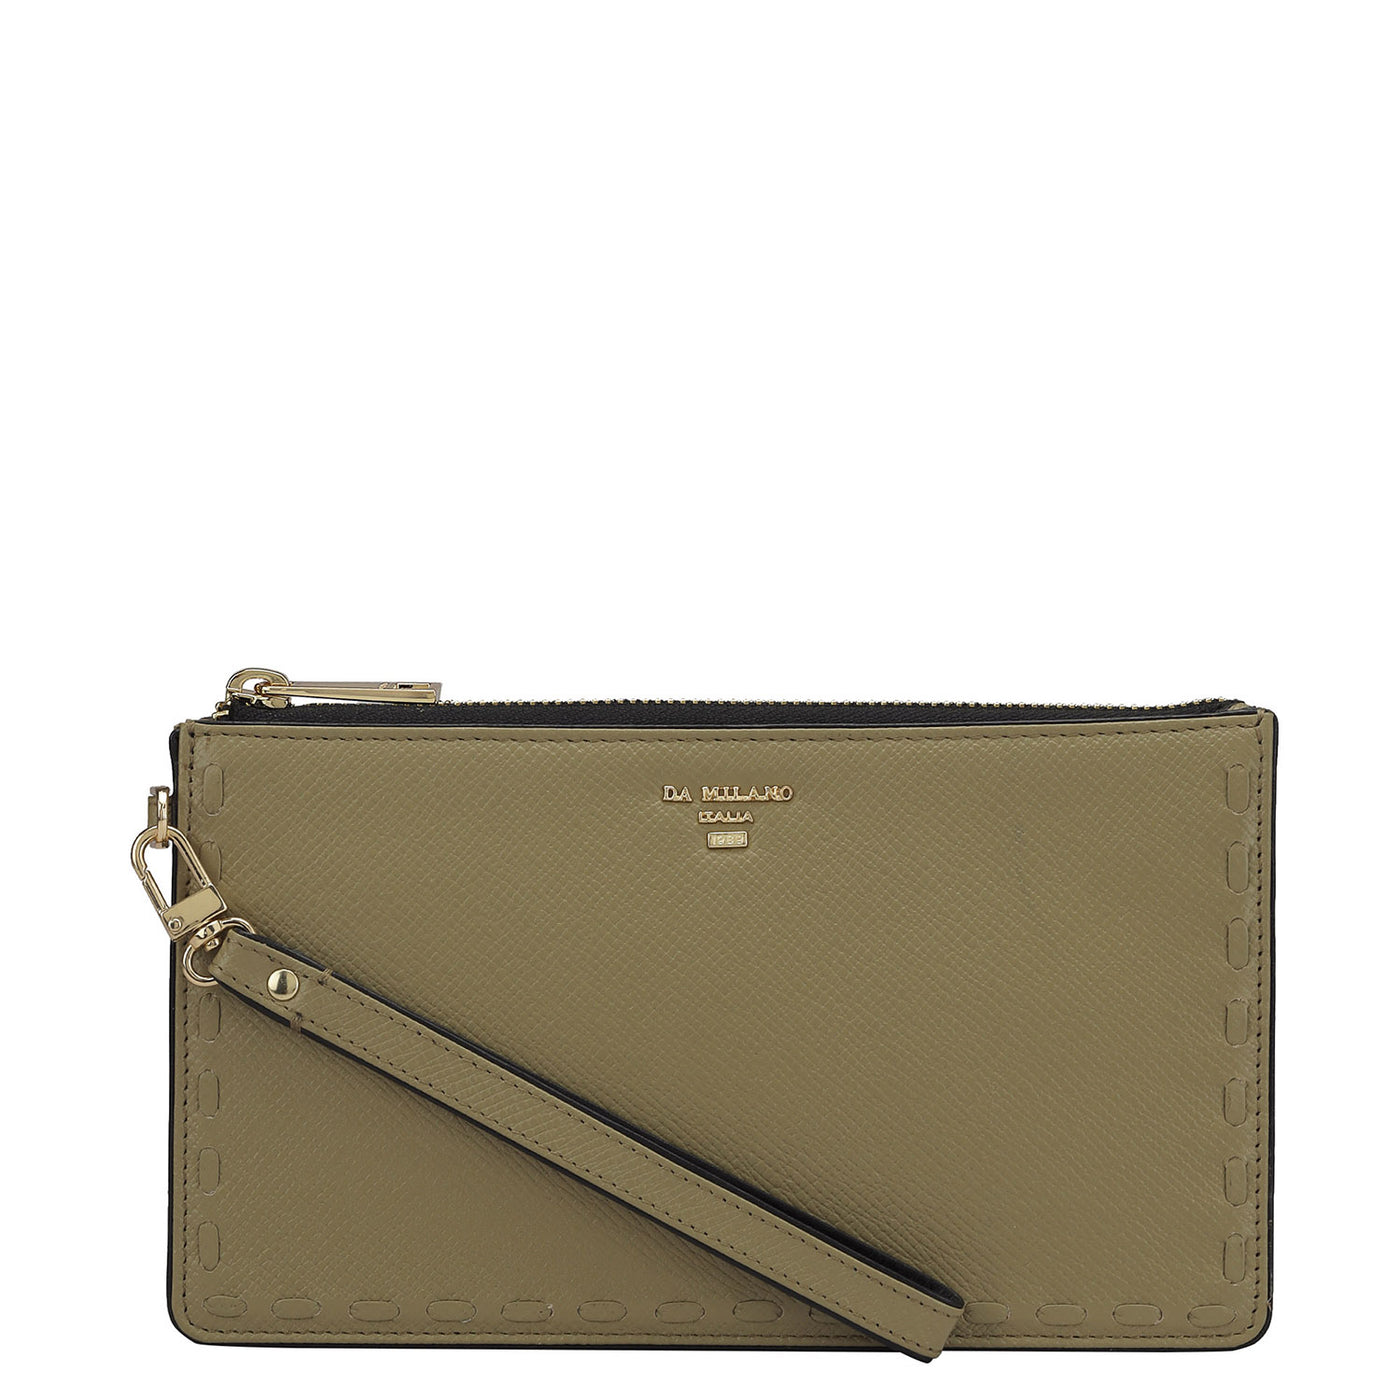 Franzy Leather Ladies Wallet - Olive